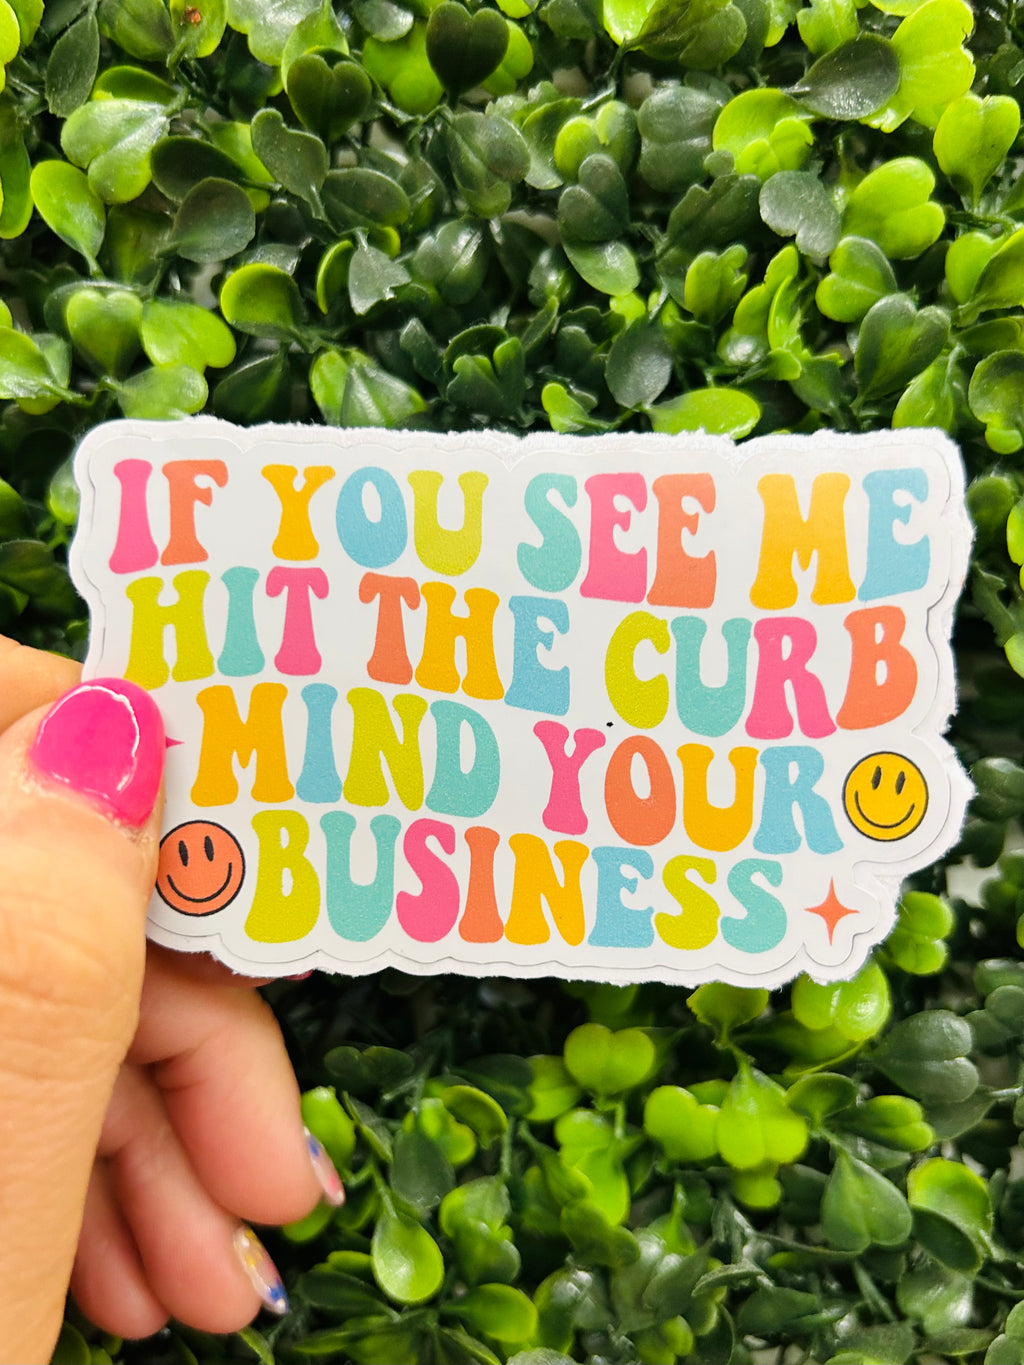 This "If You See Me Hit The Curb- Mind Your Business" sticker is here to serve as a comical reminder to you and your peers to mind your own business! Let everyone know about your playful attitude with this funny sticker. It looks good on anything from a laptop to a lamppost, so don't be shy!